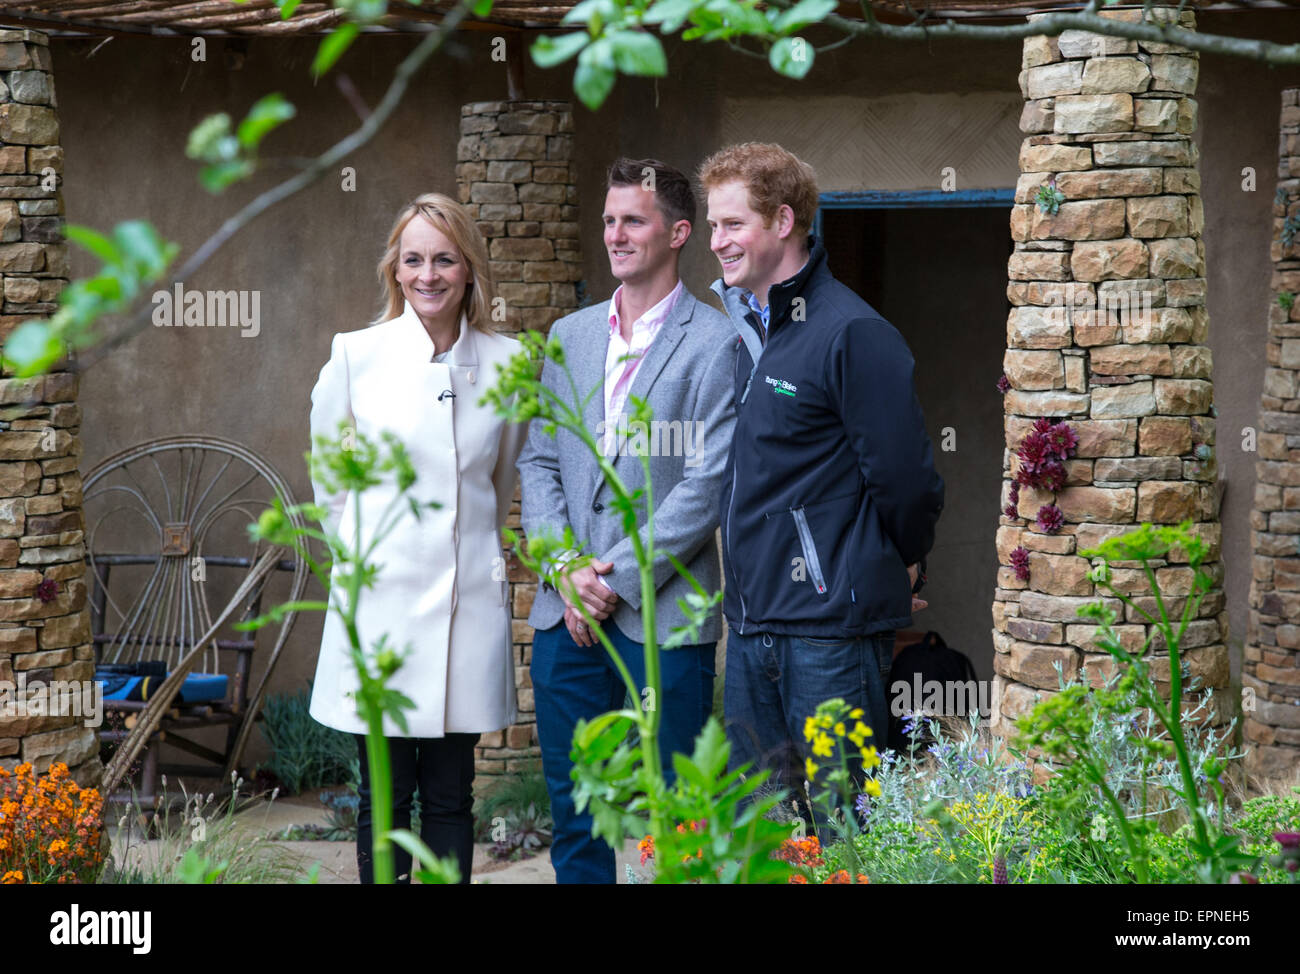 HRH Prince Harry at the 'Sentebale - Hope in Vulnerability' garden at RHS Chelsea  with Matt Keightley and Louise Minchin. Stock Photo